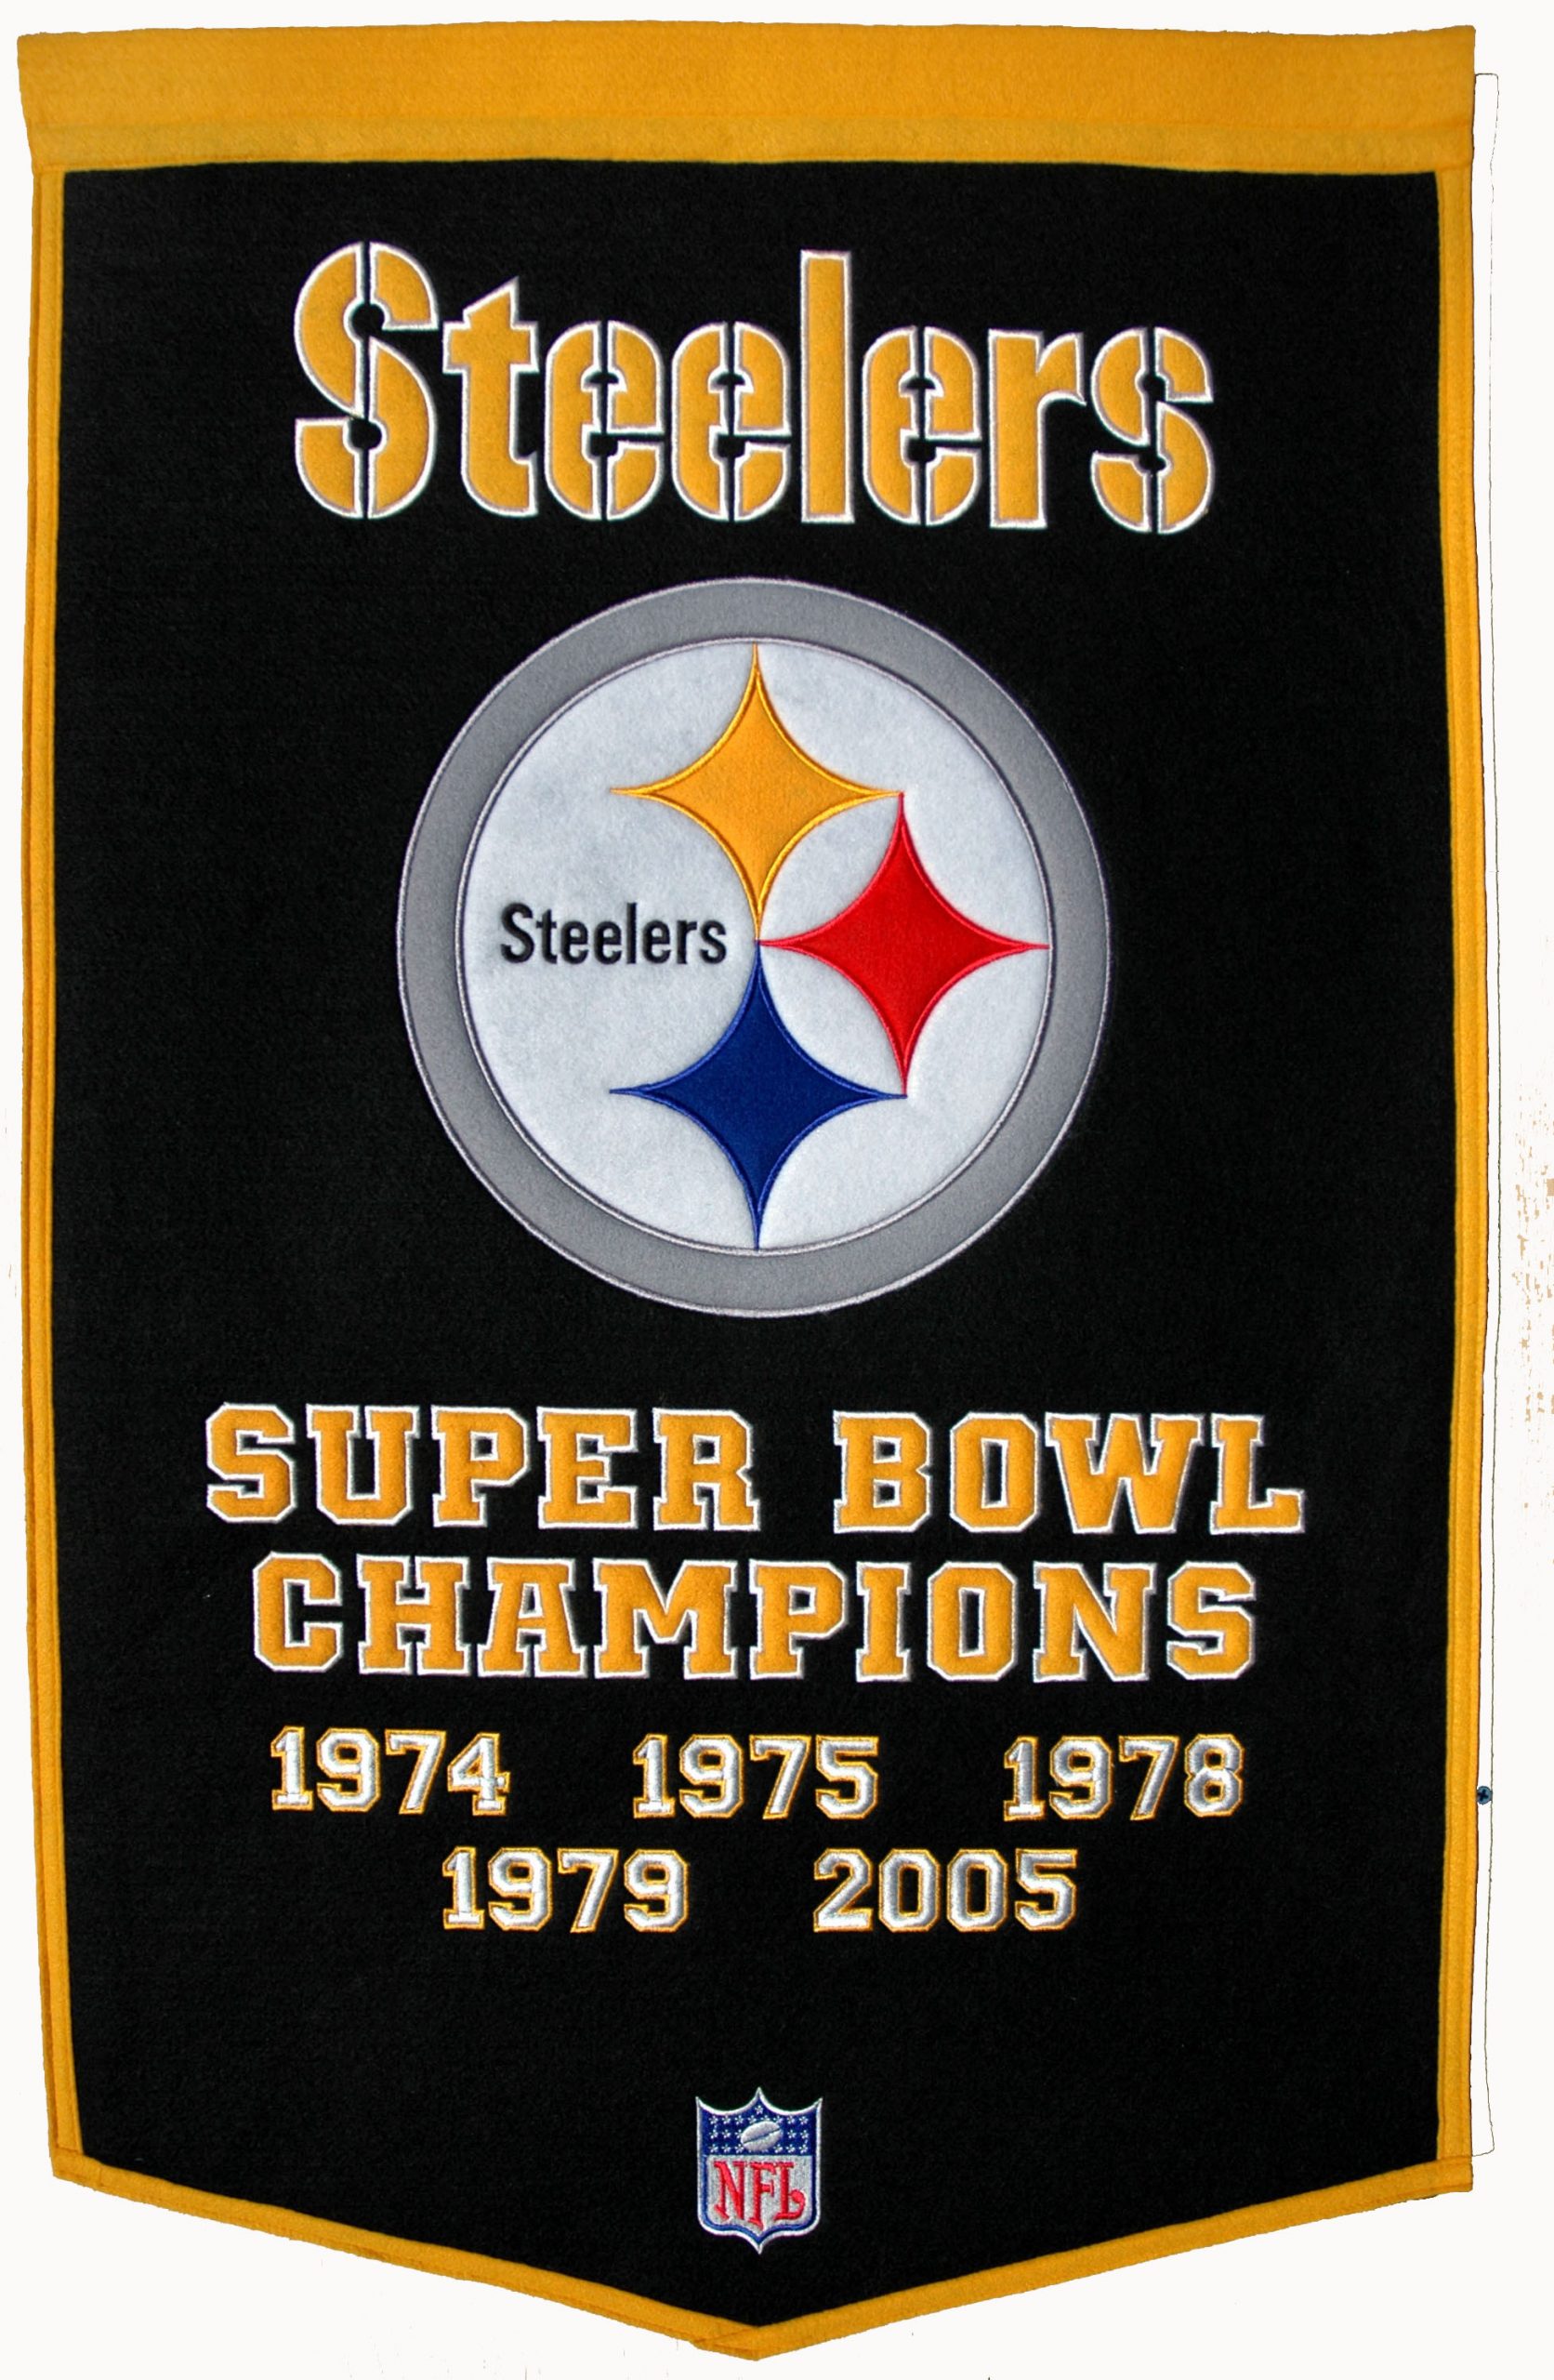 Pittsburgh Steelers Super Bowl Champs Banner